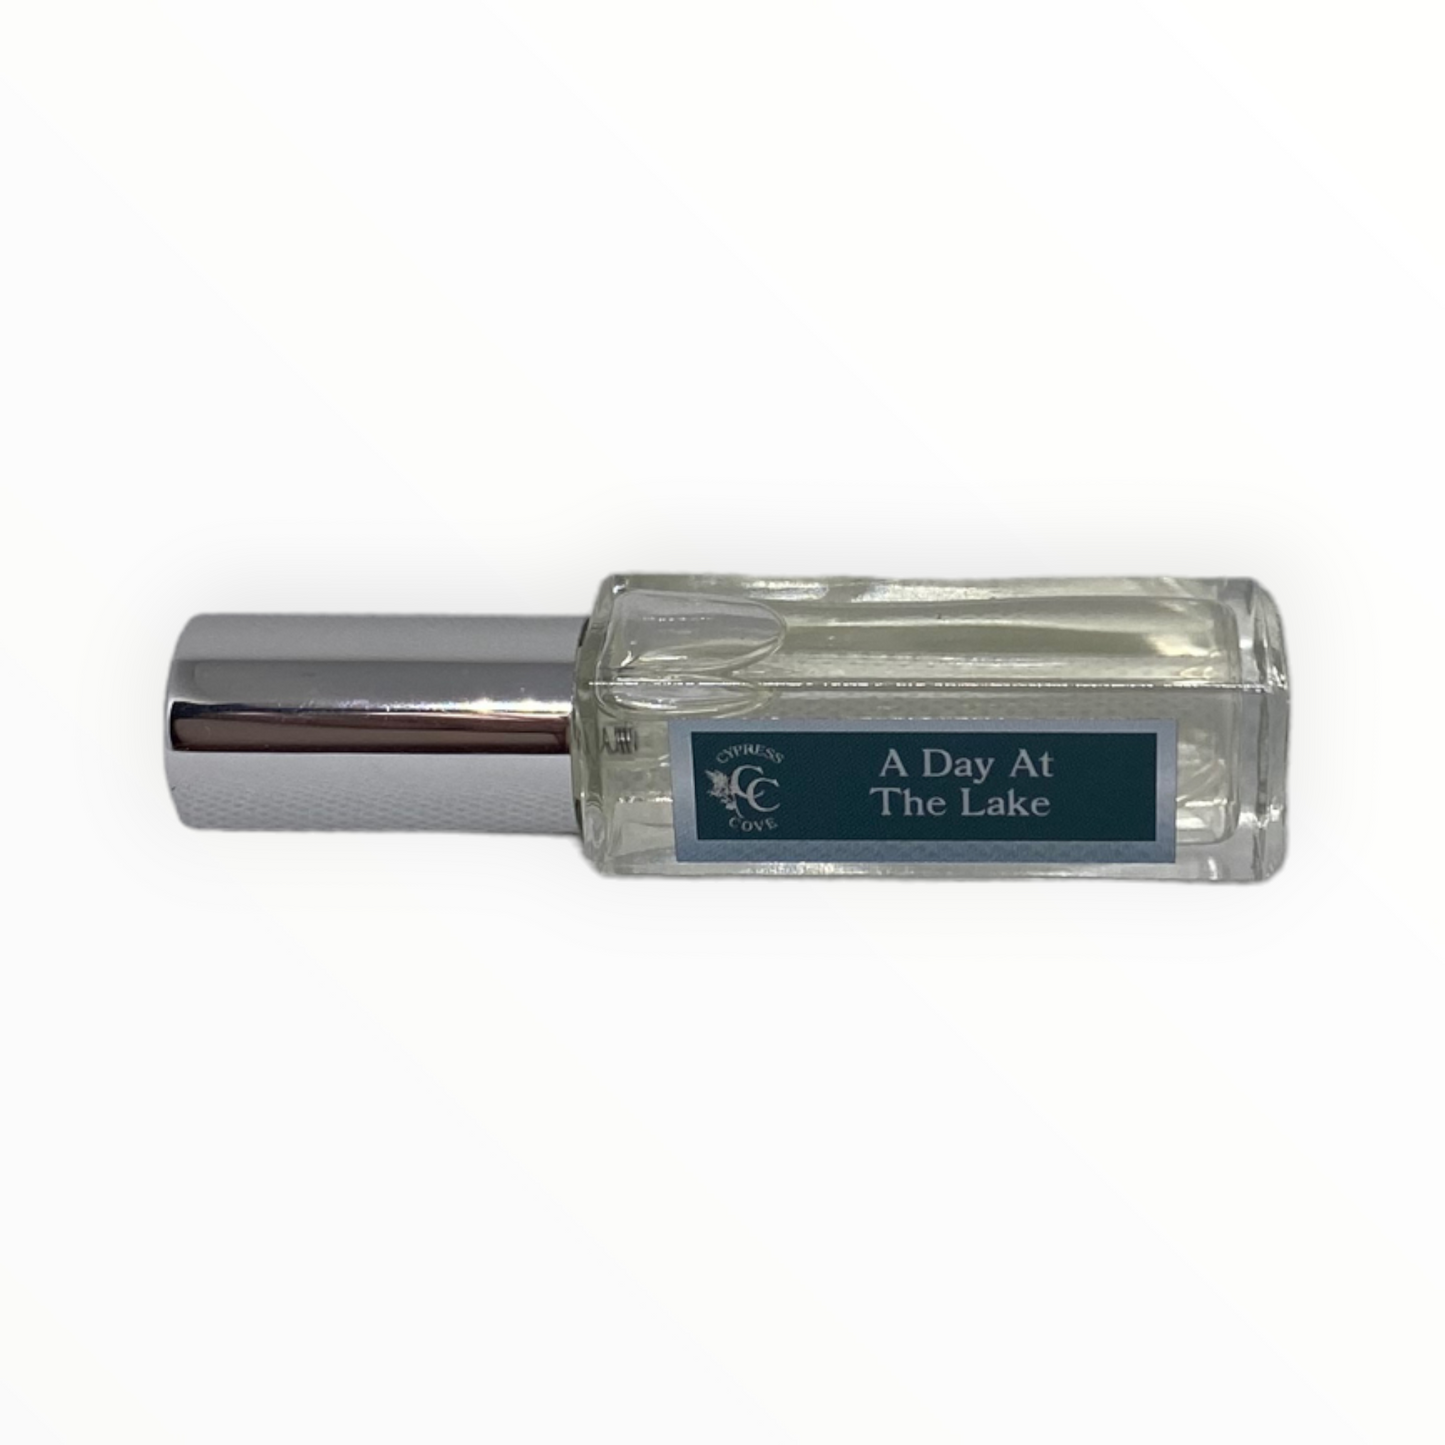 A Day at The Lake EDT Travel Vial 10ml